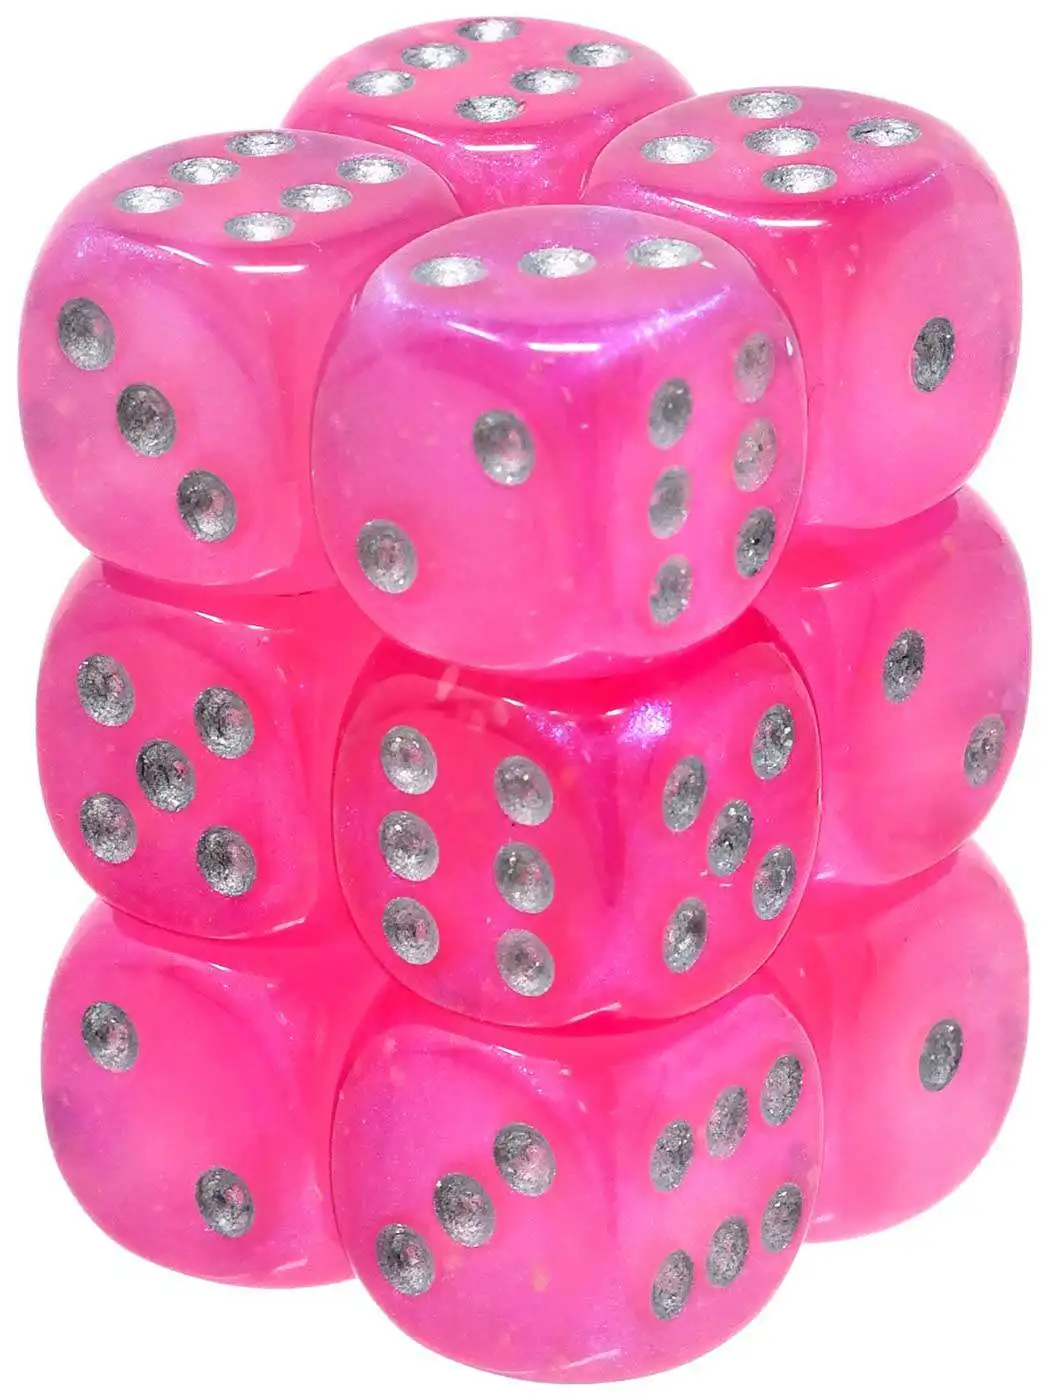 Chessex Luminary 16mm D6 Dice Set Sky With Silver for sale online 